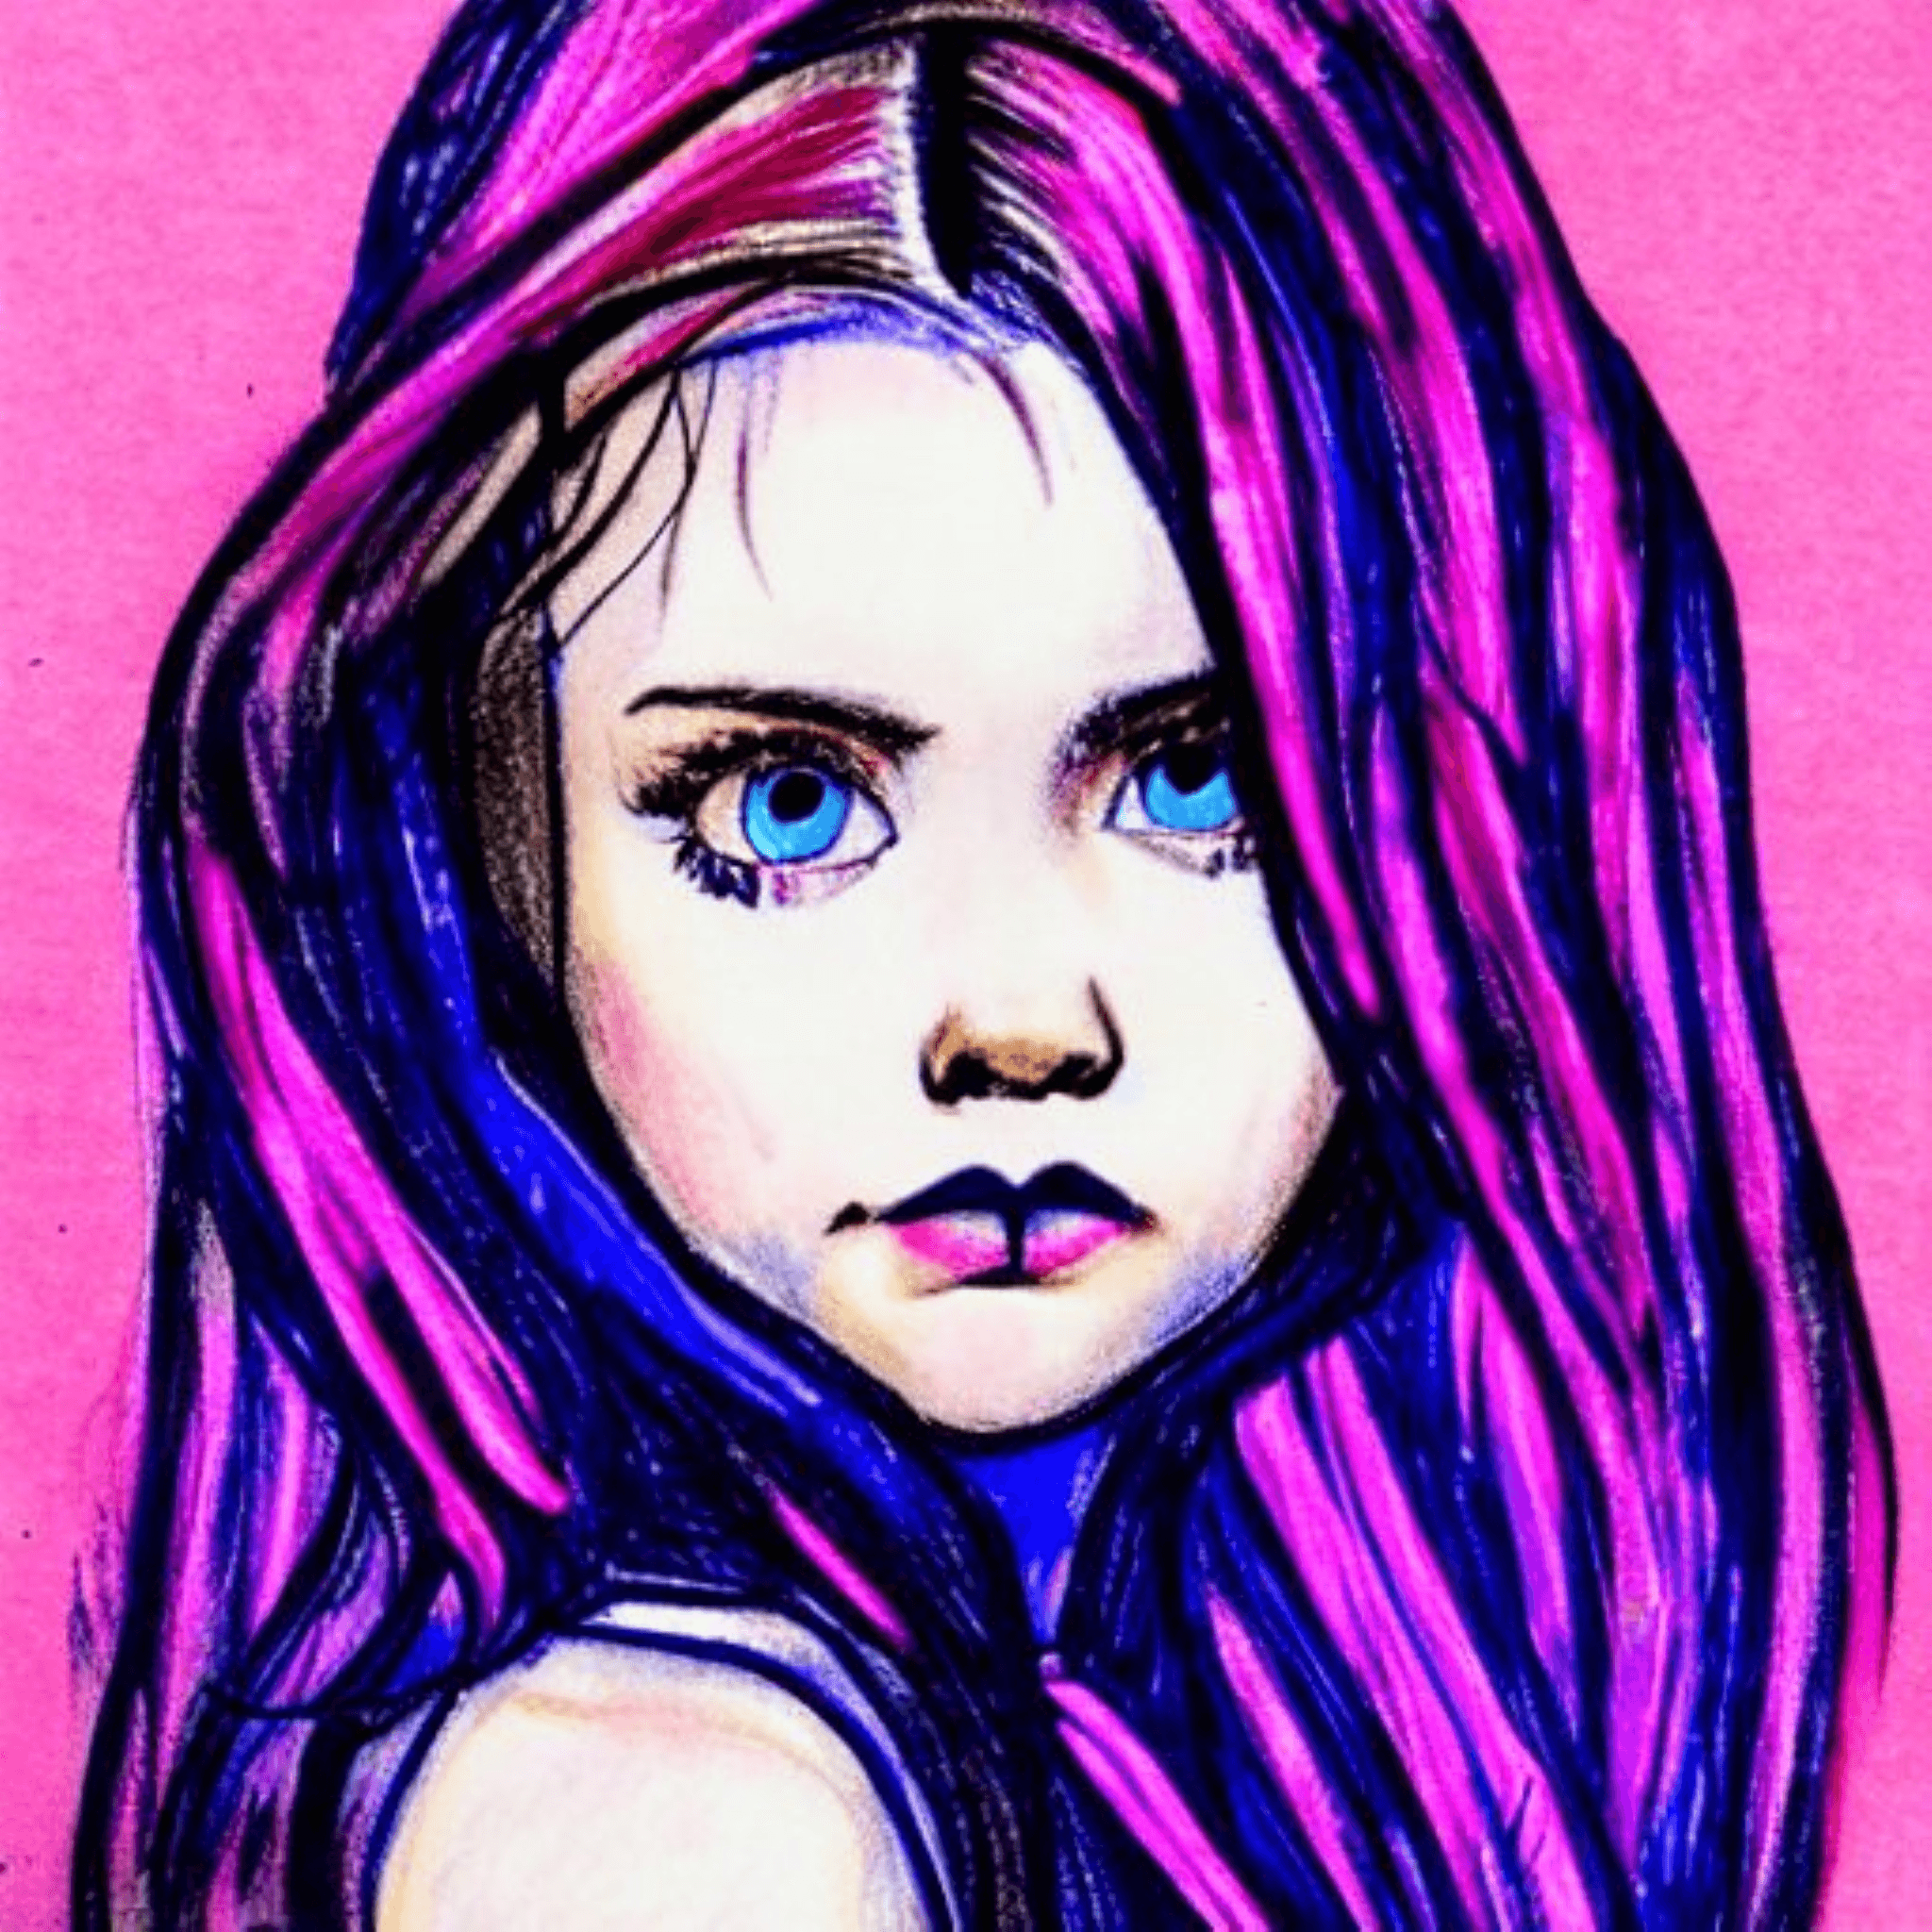 ART GALLERY - Art Drawing of a Young Girl Blue Eyes and Pink Hair